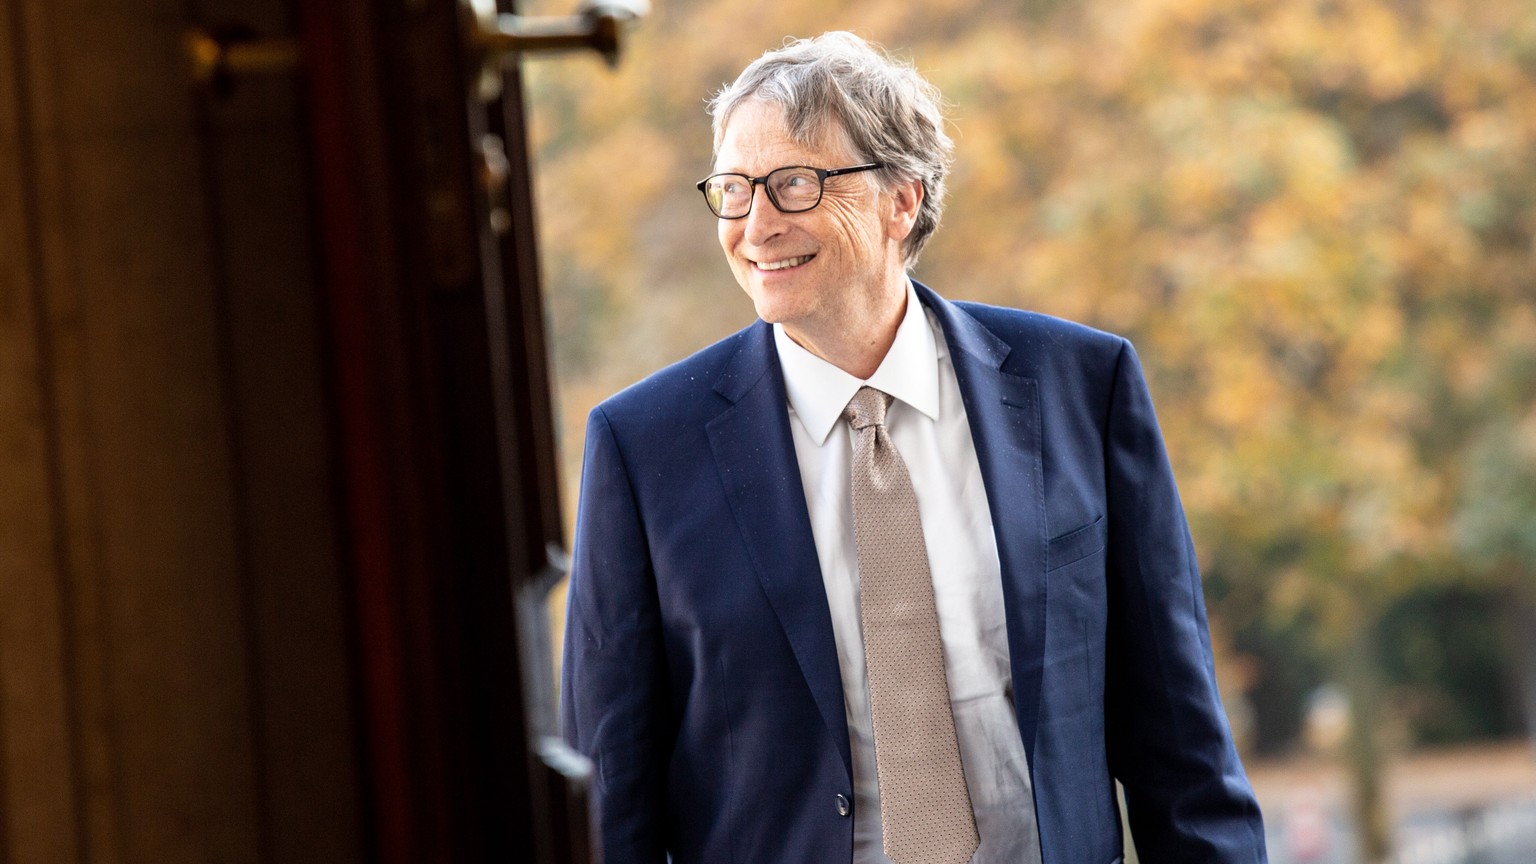 epa07098604 Bill Gates, founder of Microsoft and co-founder of the Bill and Melinda Gates Foundation, arrives for a meeting with German President Frank-Walter Steinmeier (not pictured) at the Bellevue ...